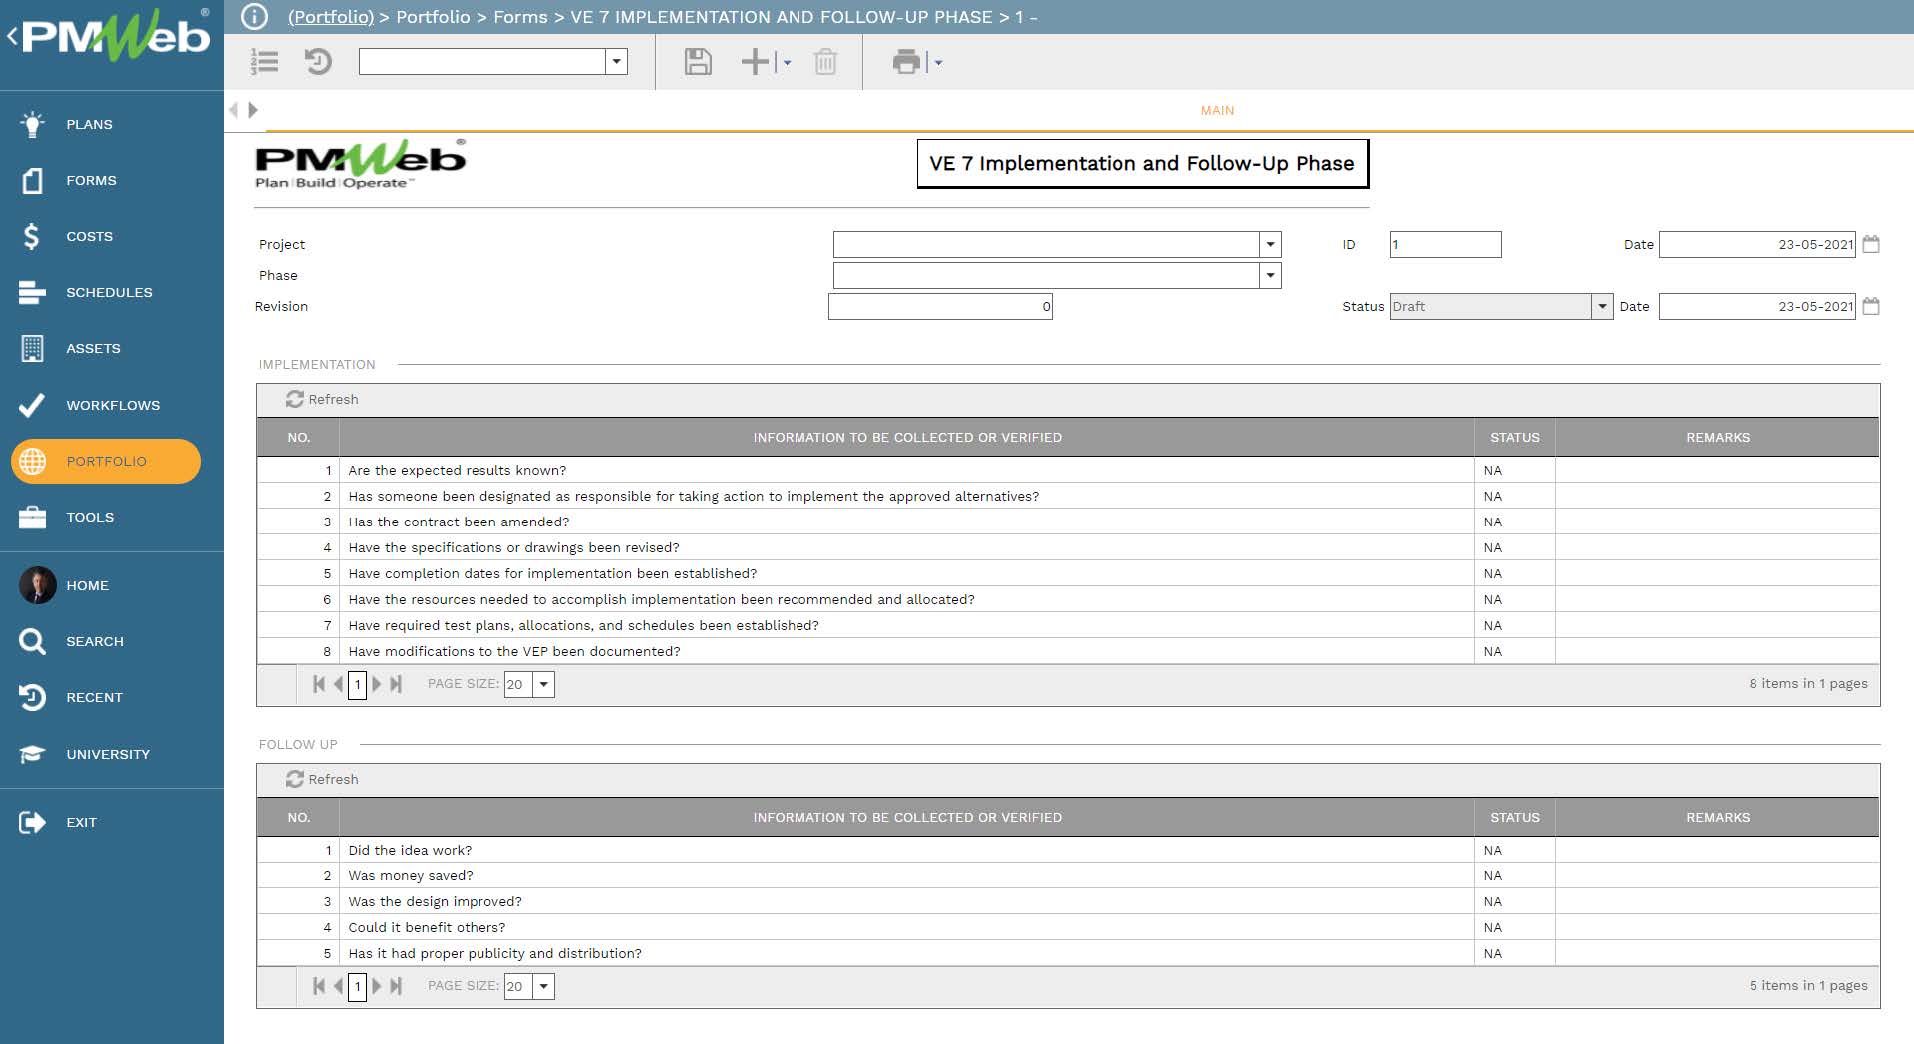 PMWeb 7 Portfolio Forms VE 7 Implementation and Follow Up Phase Main 